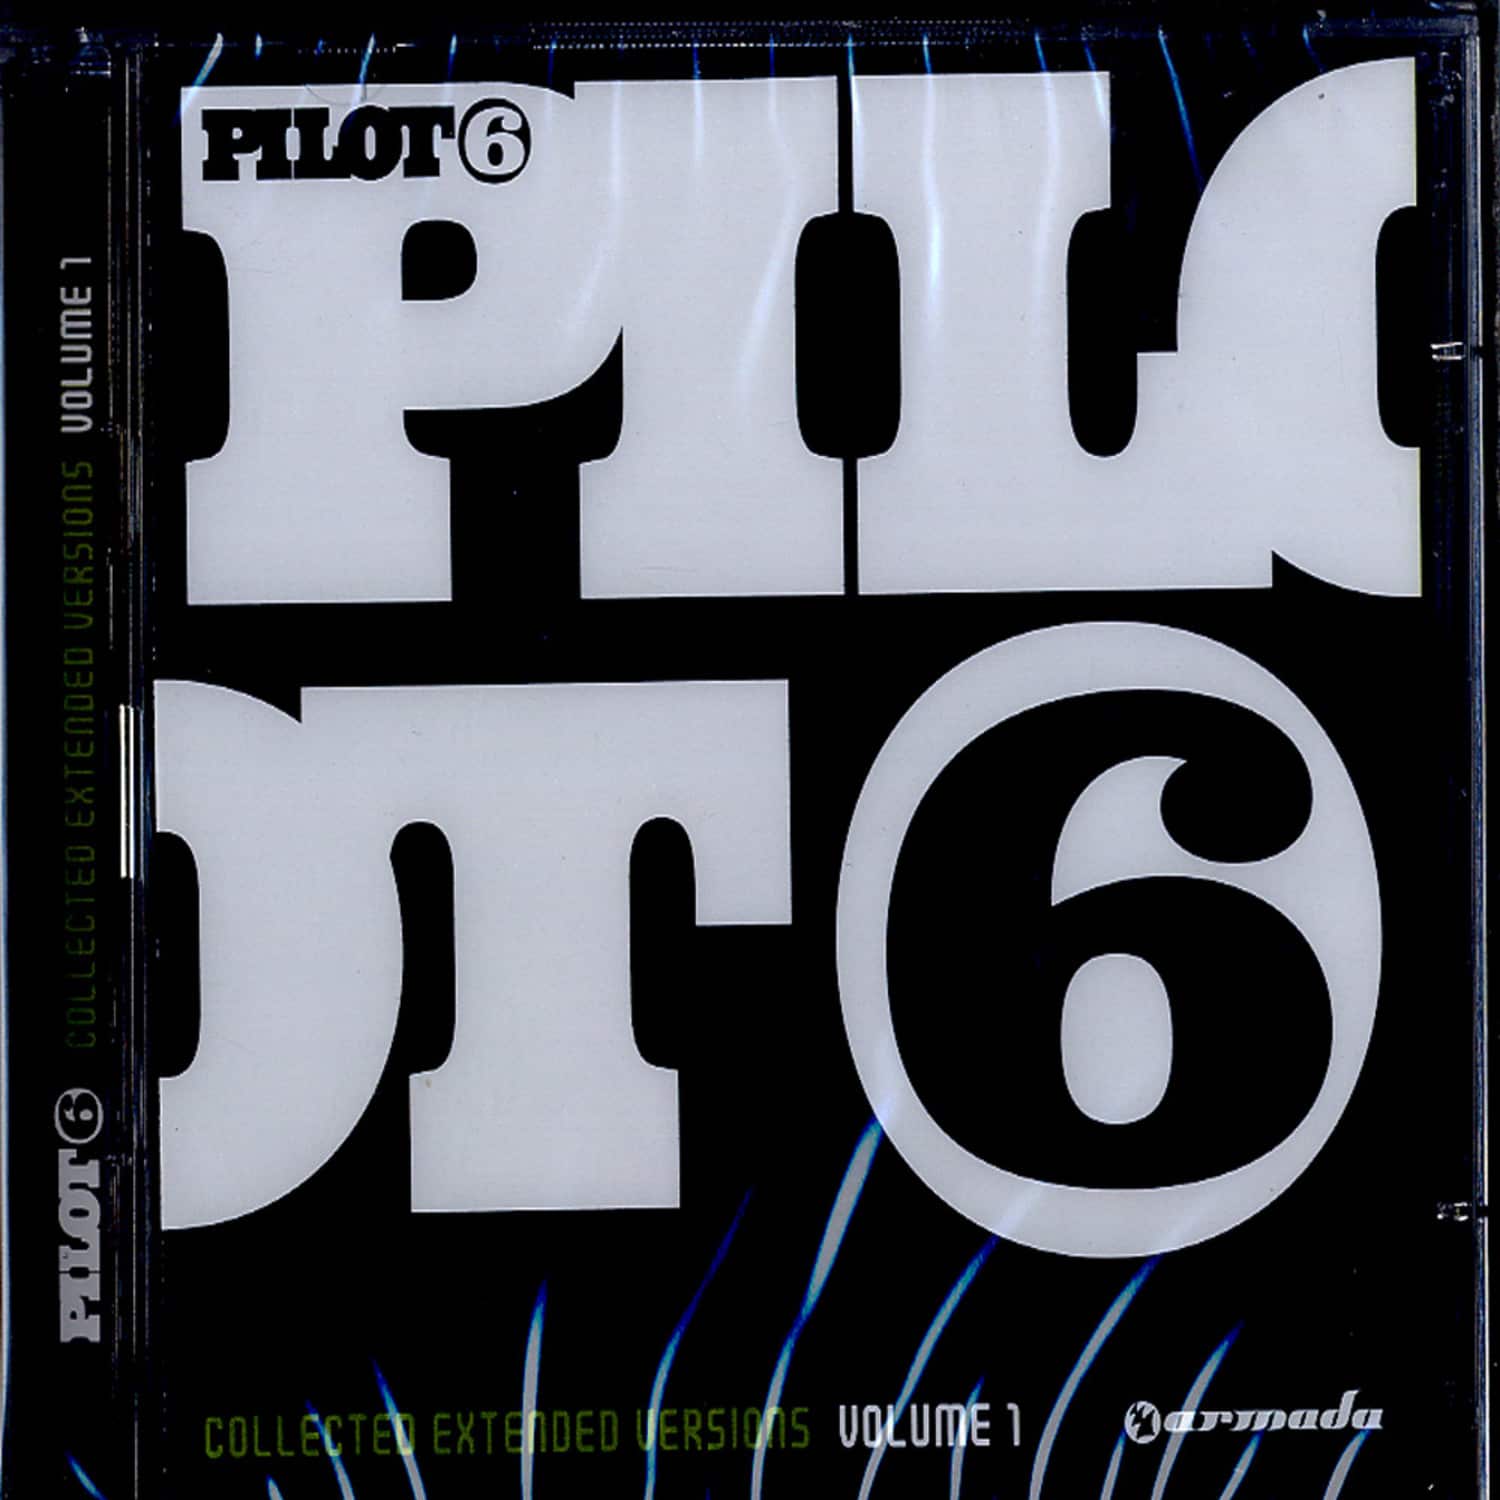 Pilot 6 - OLLECTED EXTENDED VERSIONS VOLUME 1 